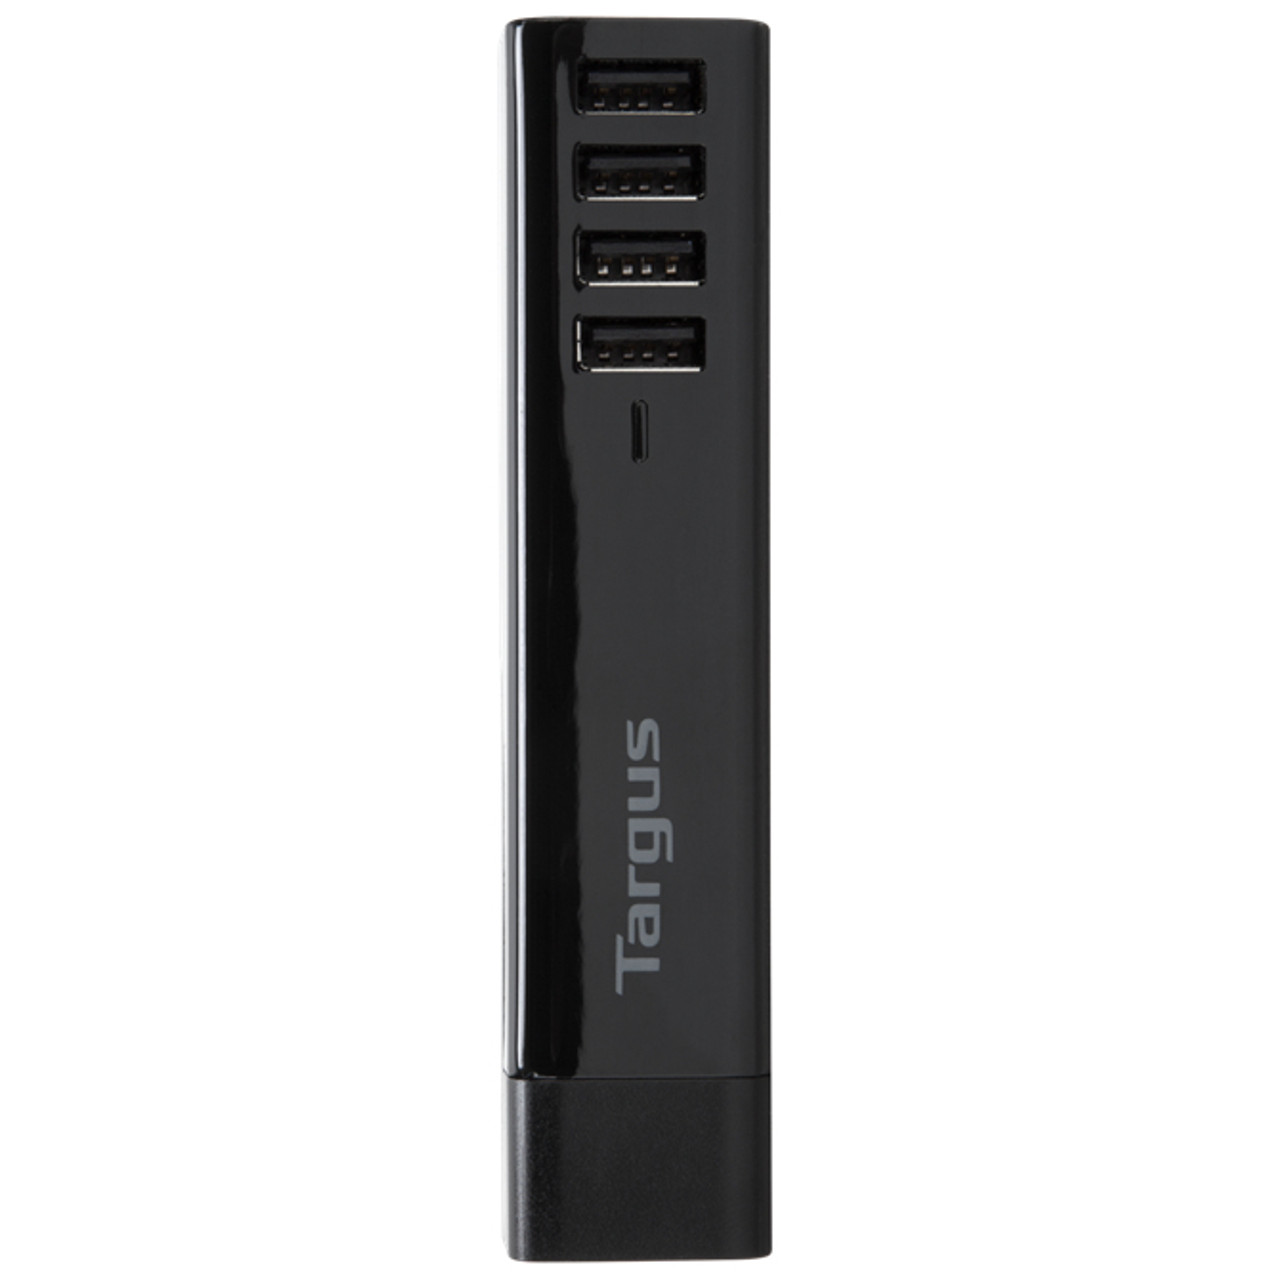 Targus APA750US Indoor Black mobile device charger